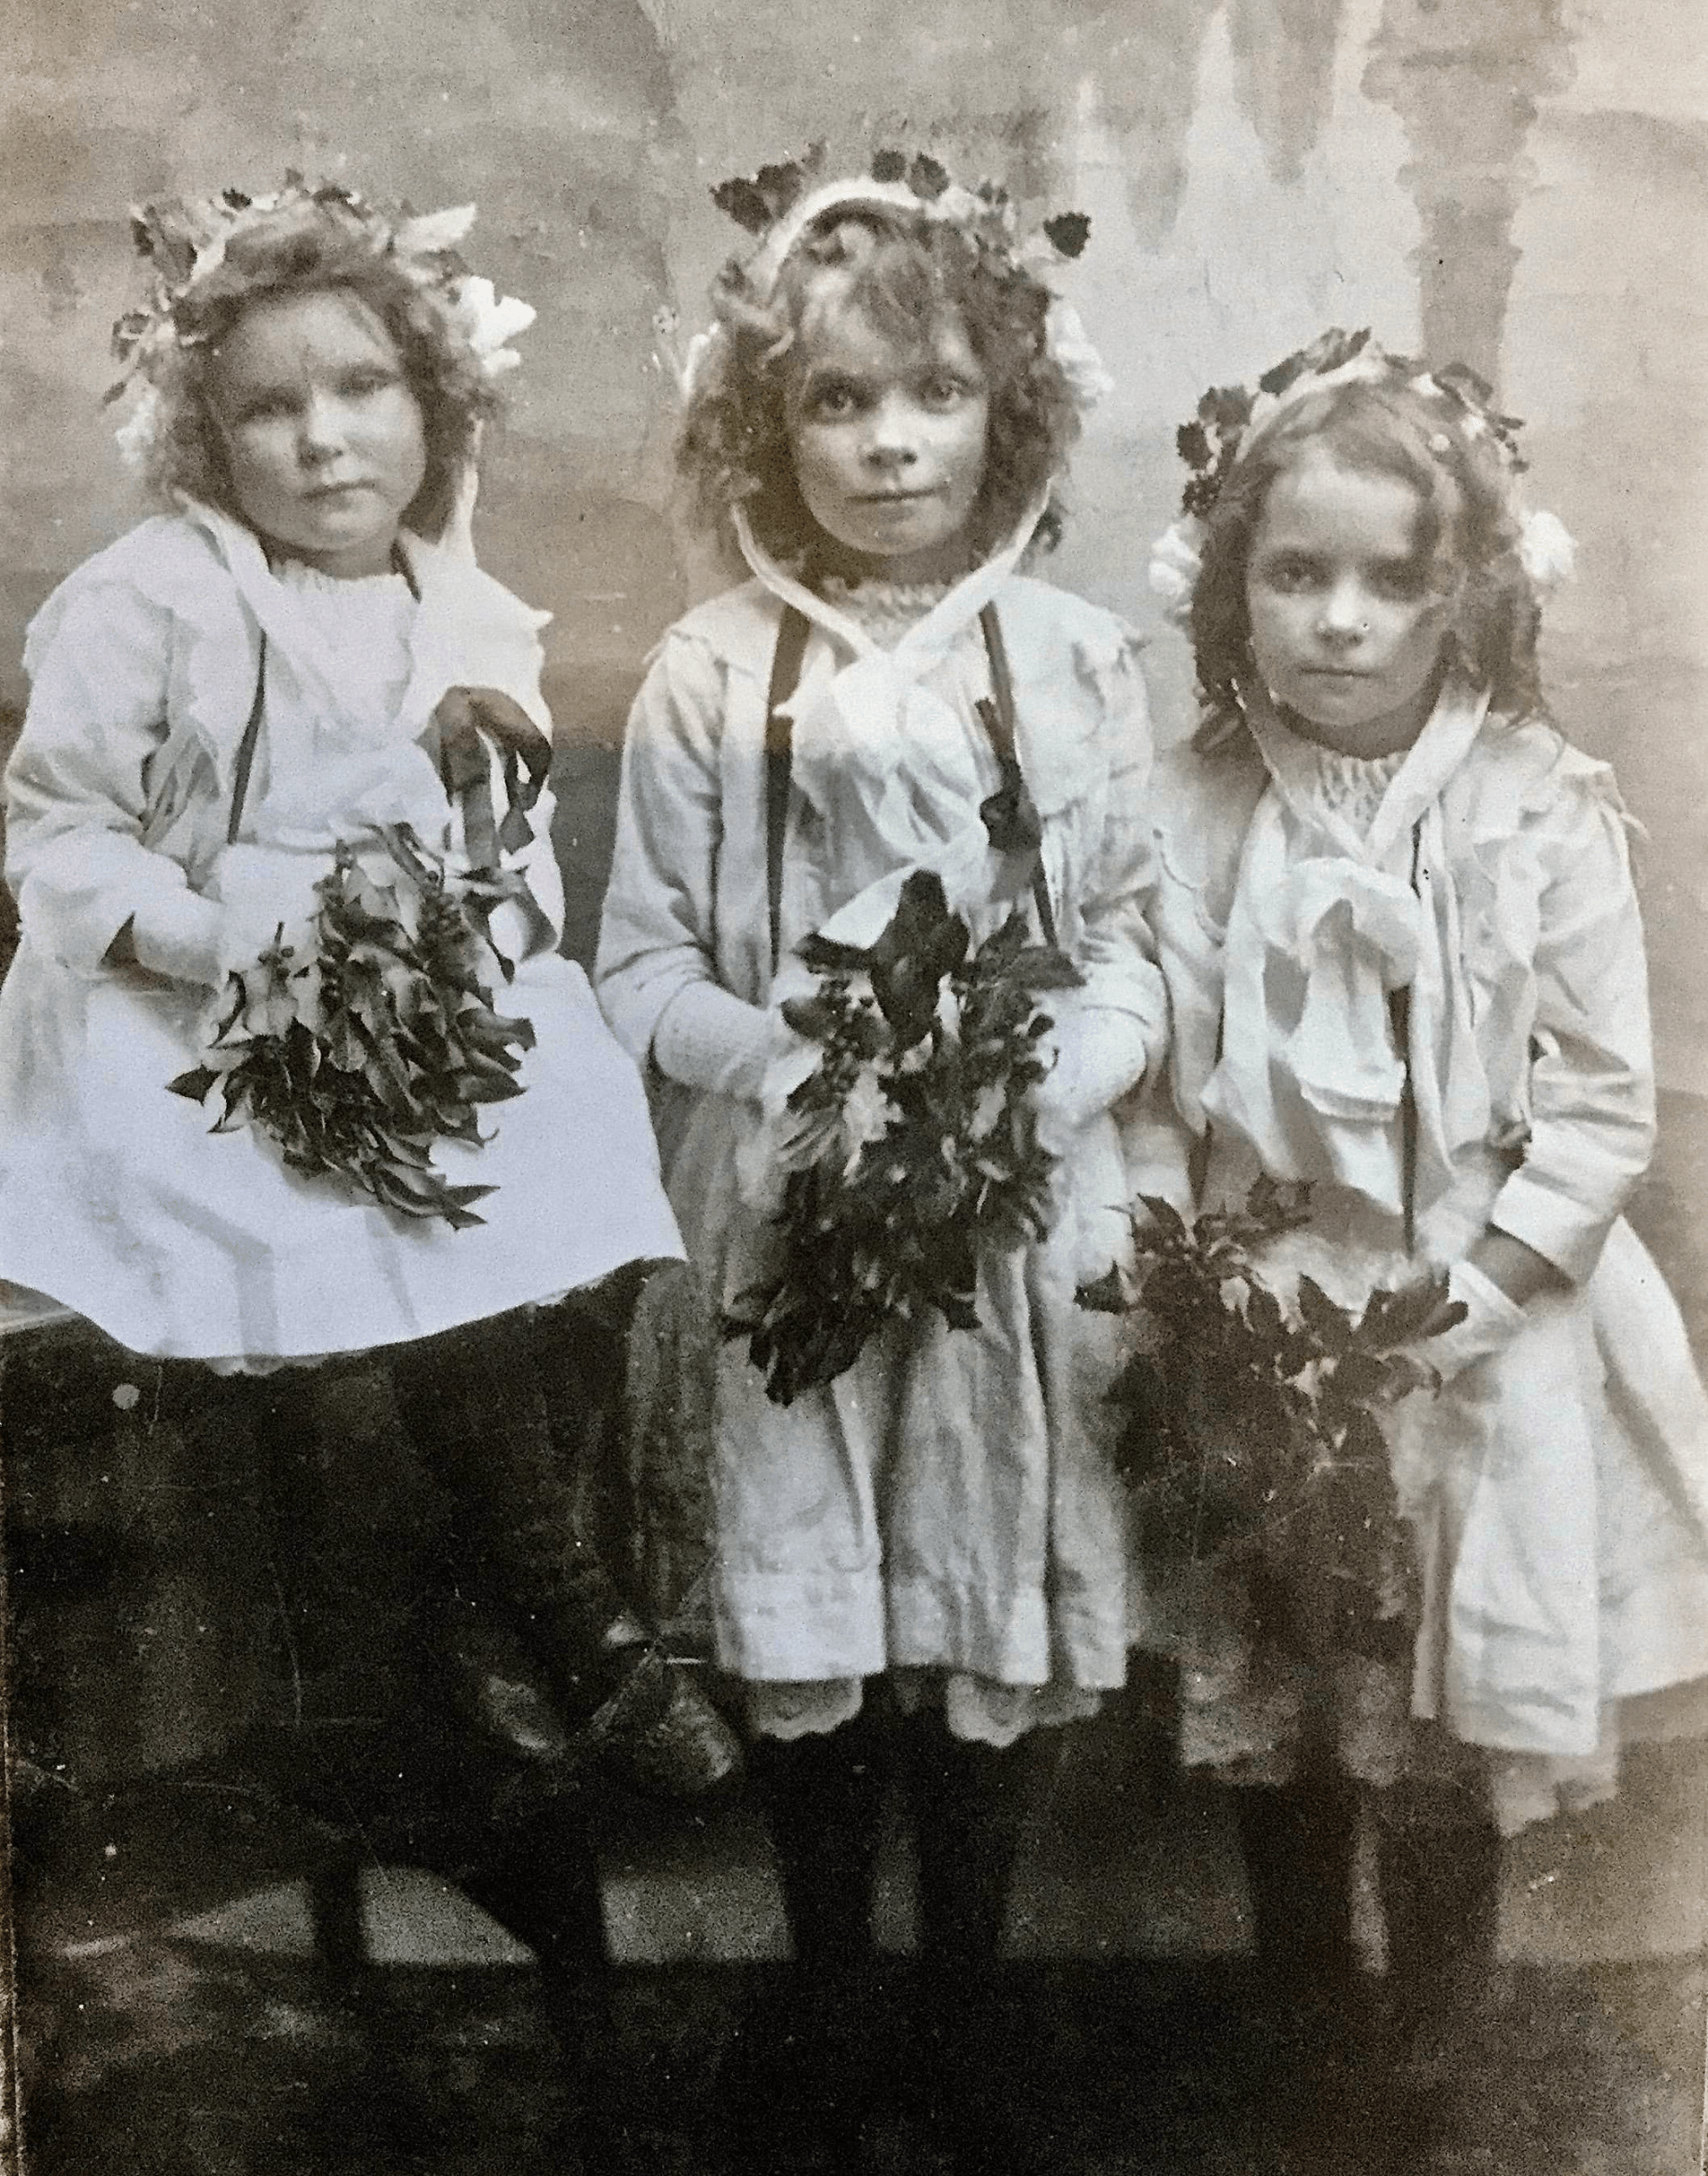 Ivy, Norah, and Dor as three young flower girls